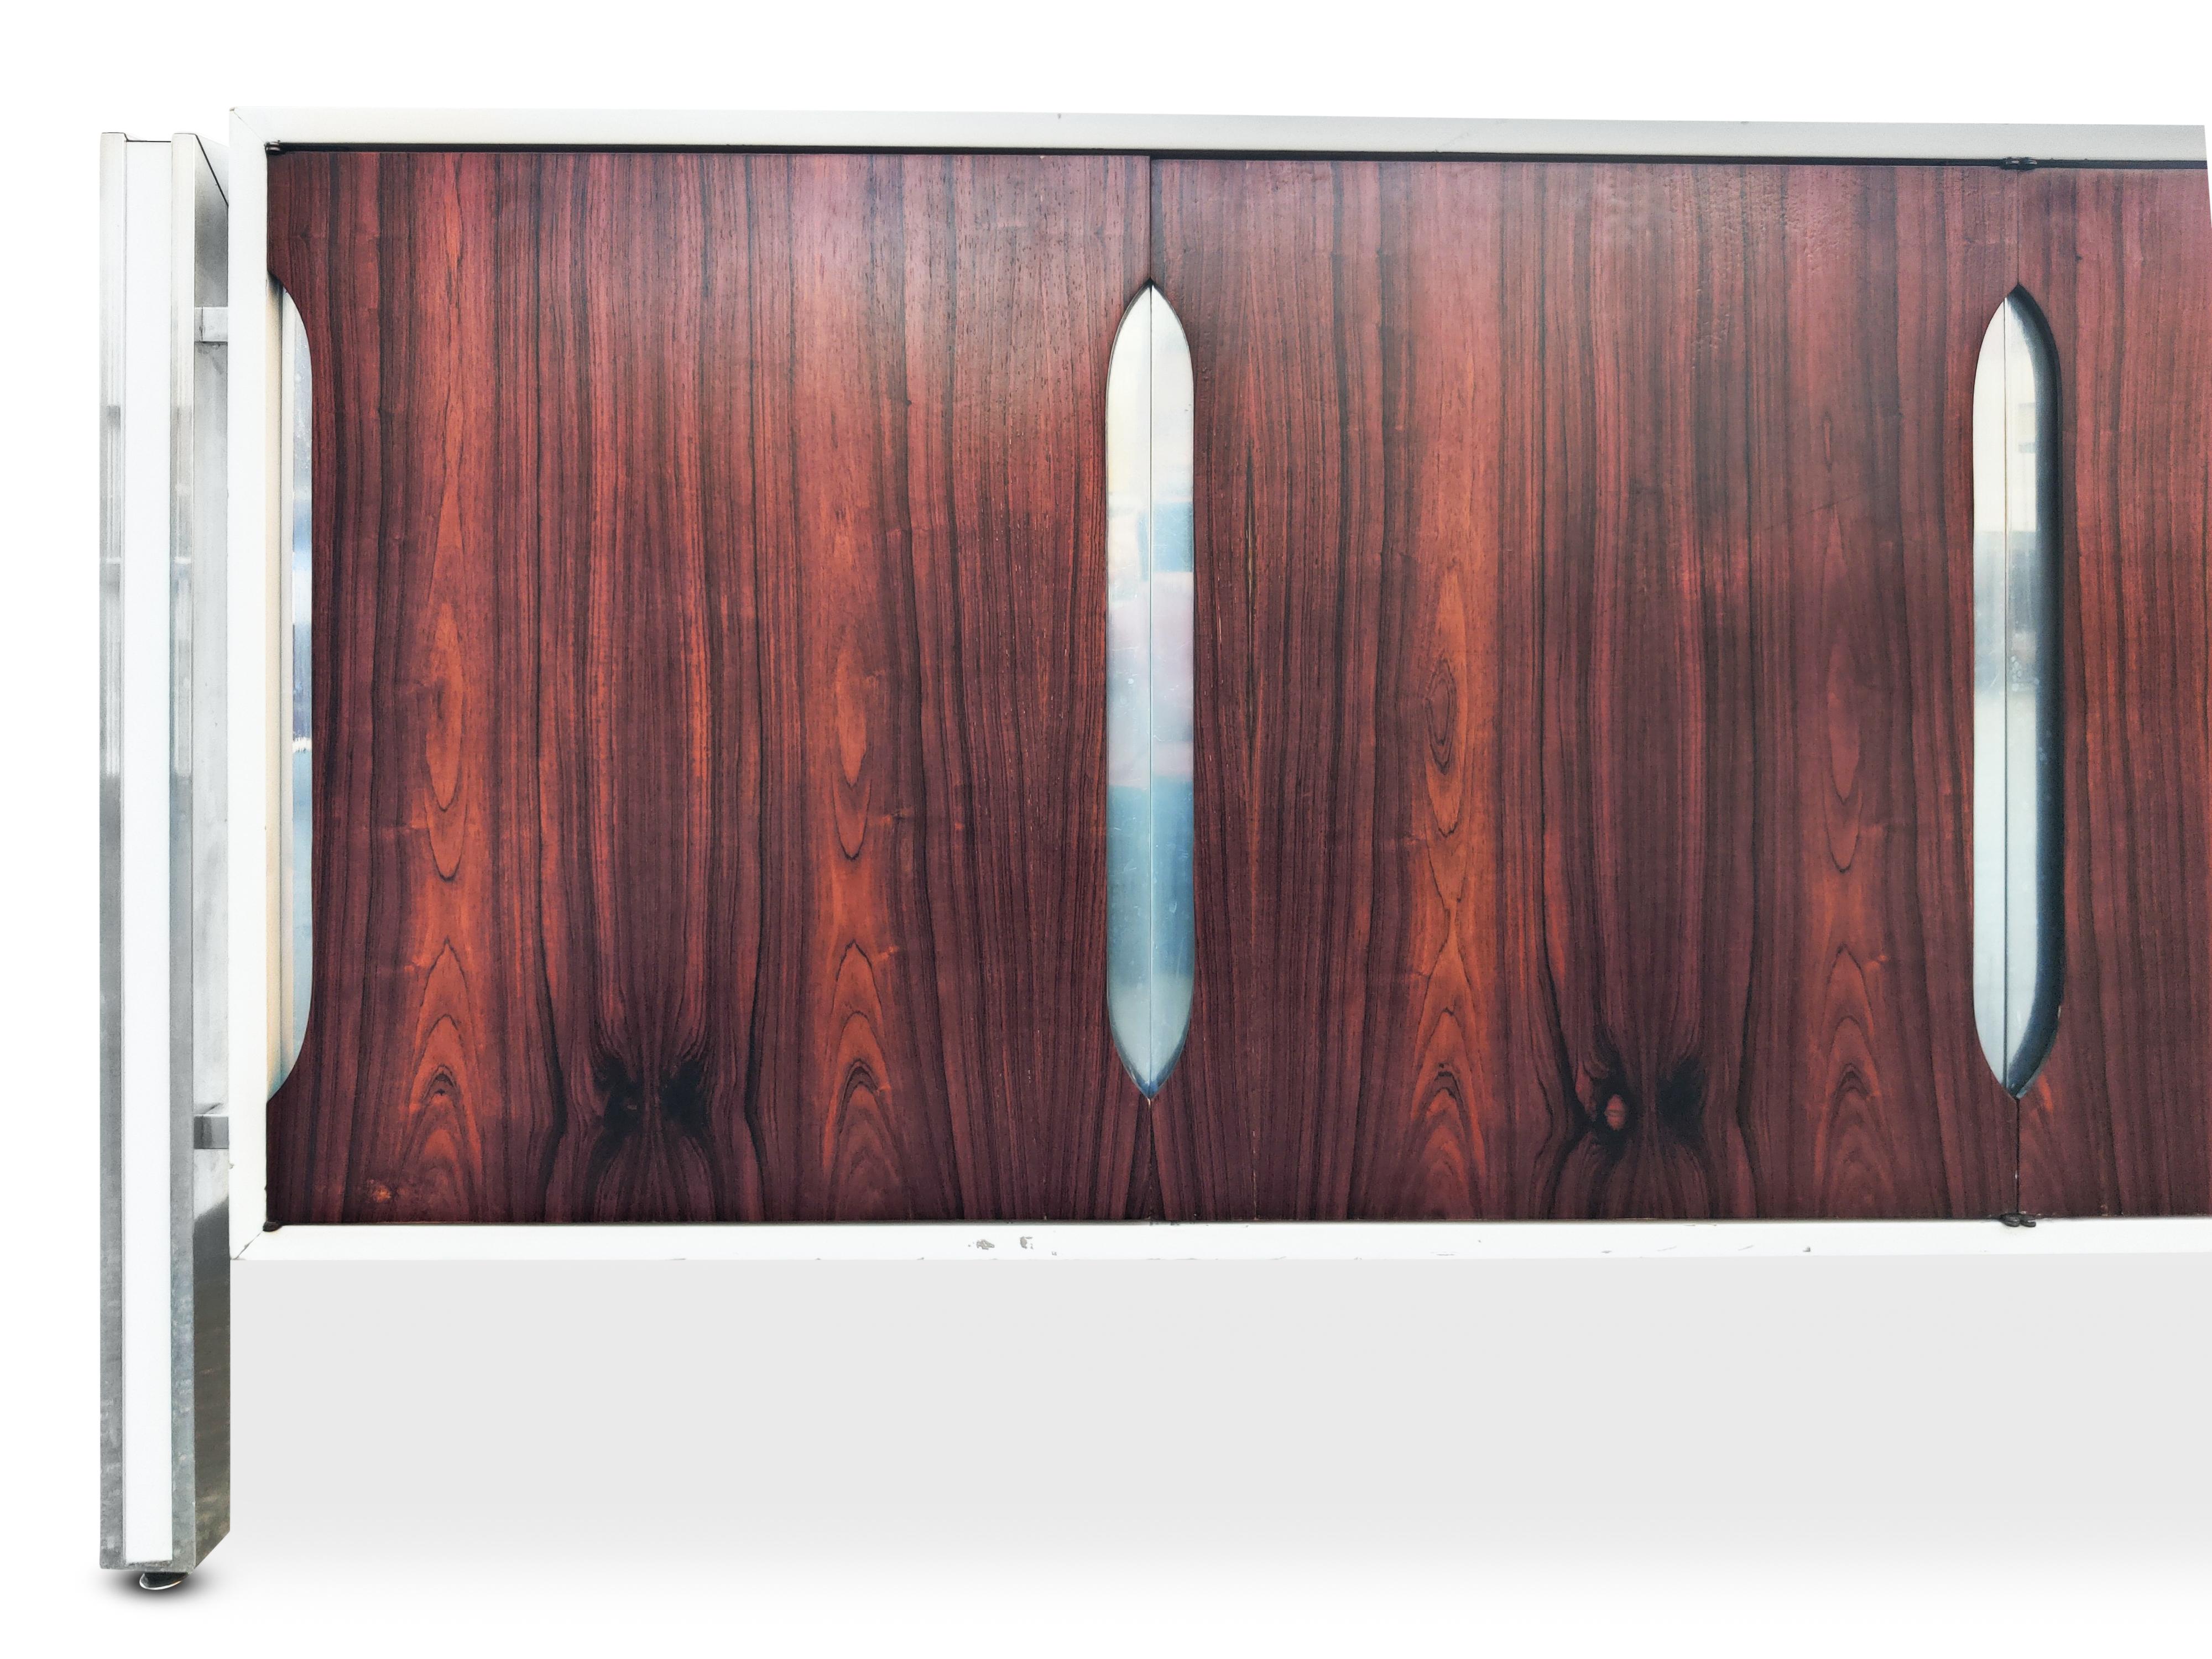 Late 20th Century 1970s Milo Baughman Style Rosewood, Laminate, and Aluminum Cabinet or Dresser For Sale